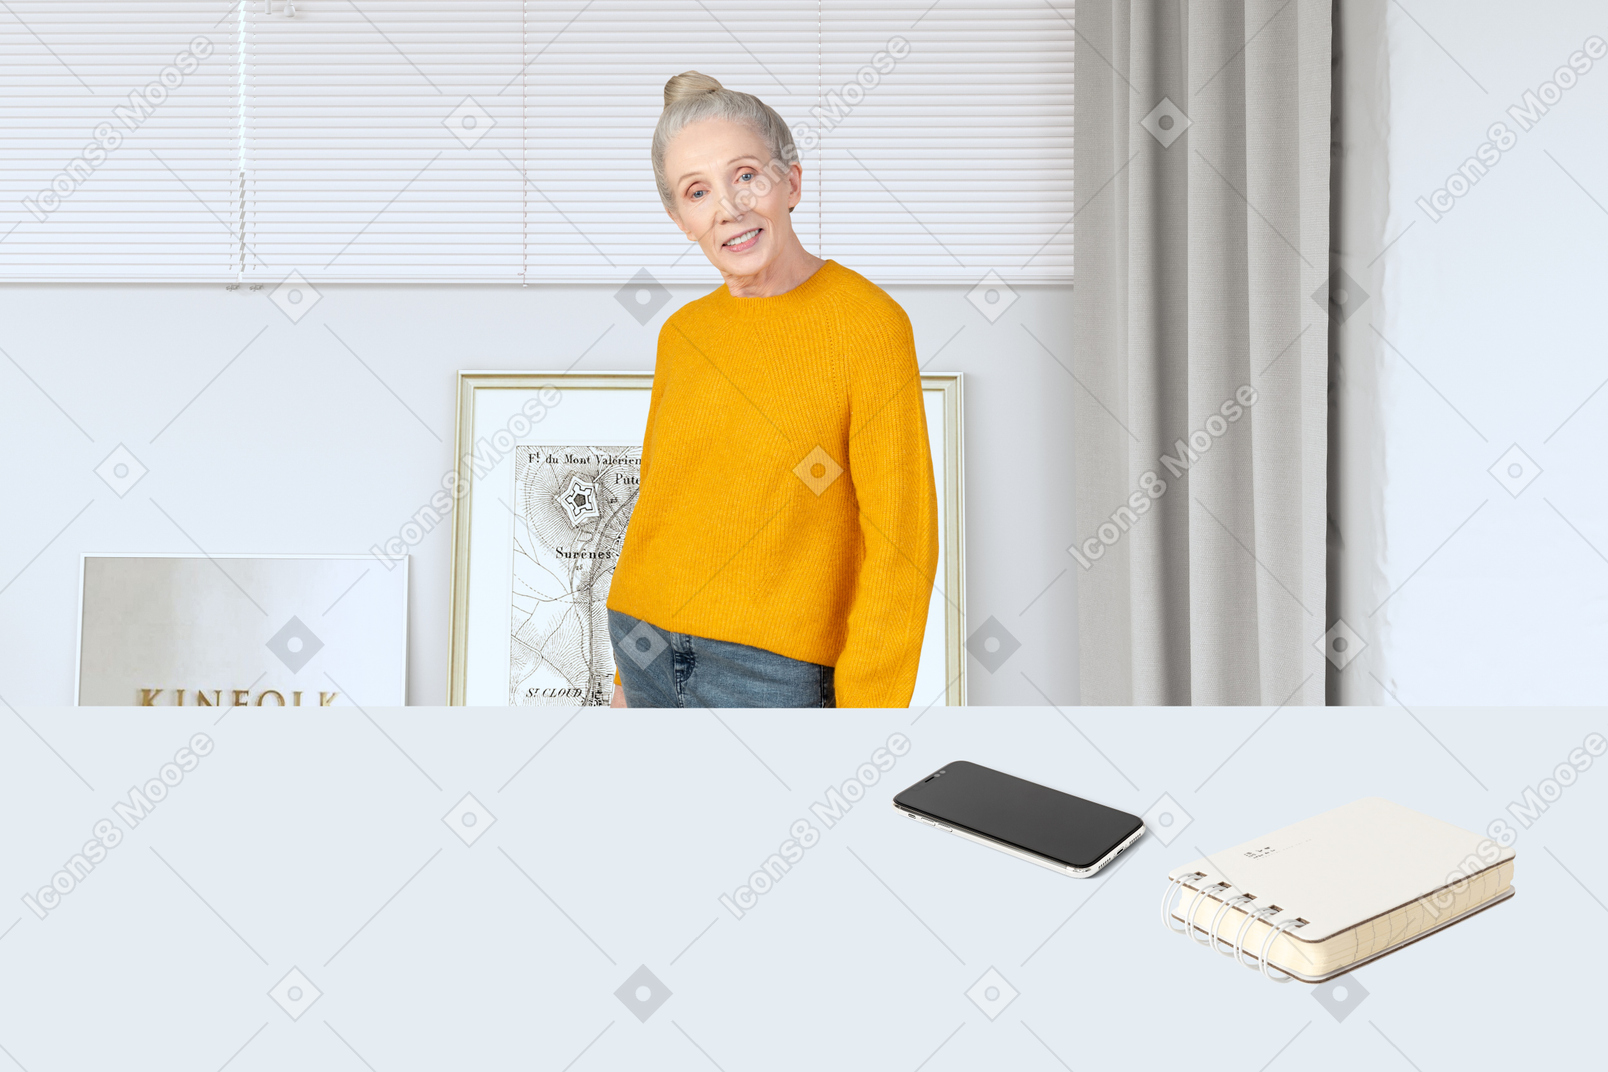 Woman in yellow sweater standing at desk with notepad and phone